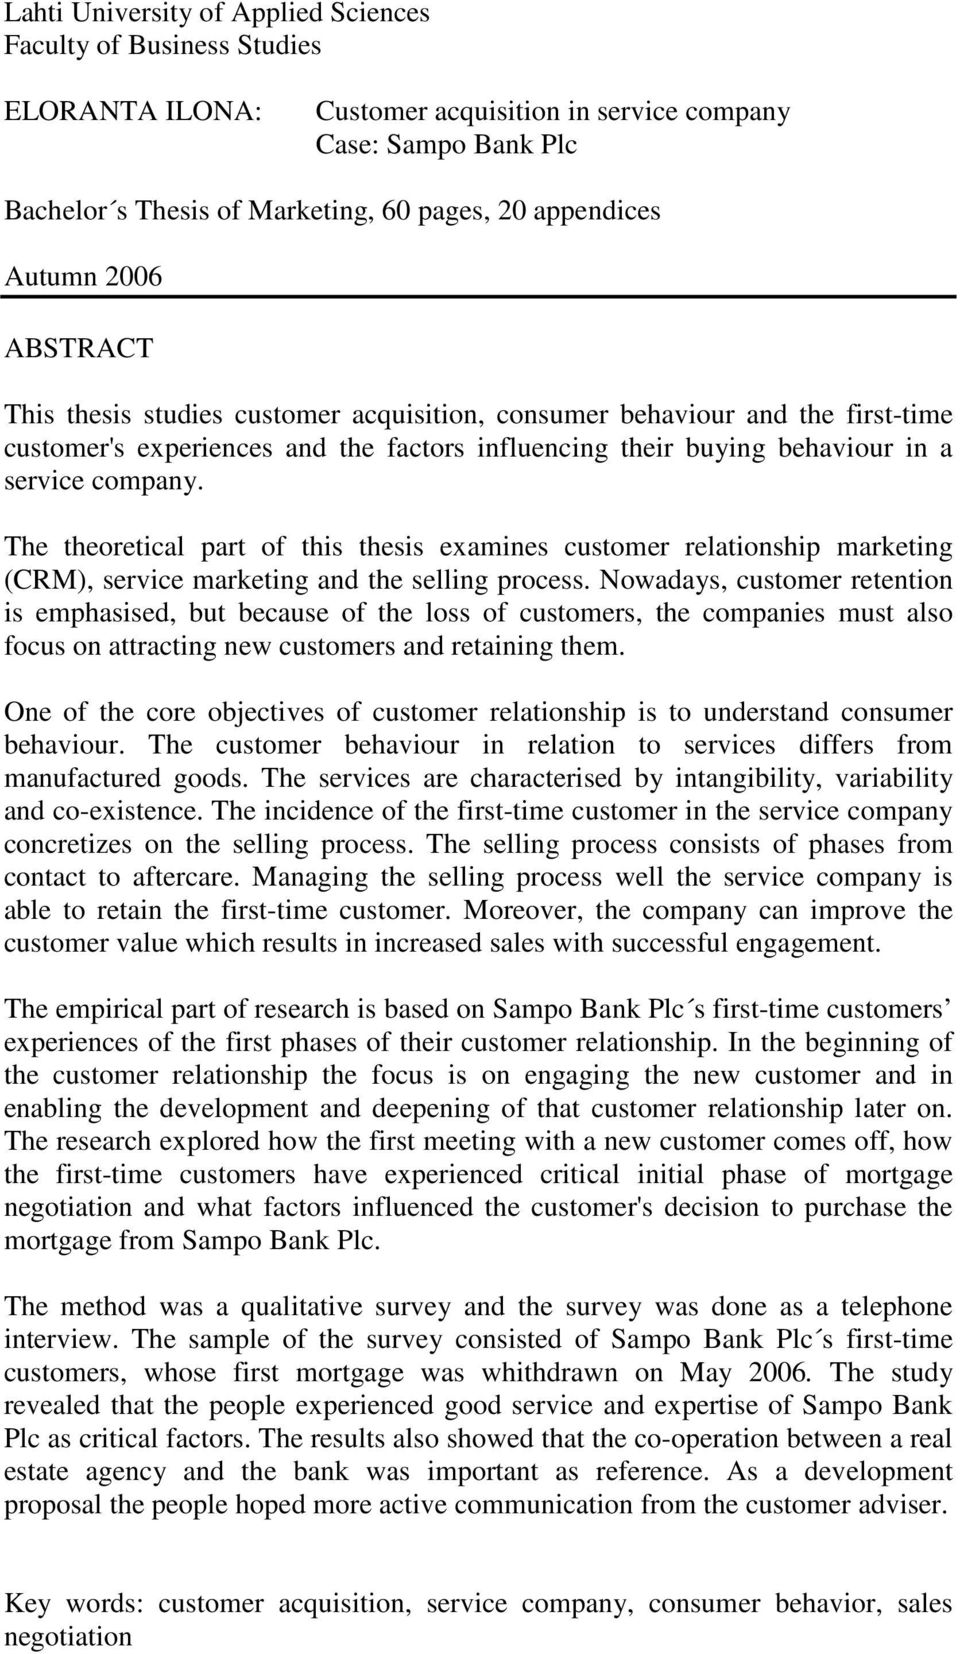 The theoretical part of this thesis examines customer relationship marketing (CRM), service marketing and the selling process.